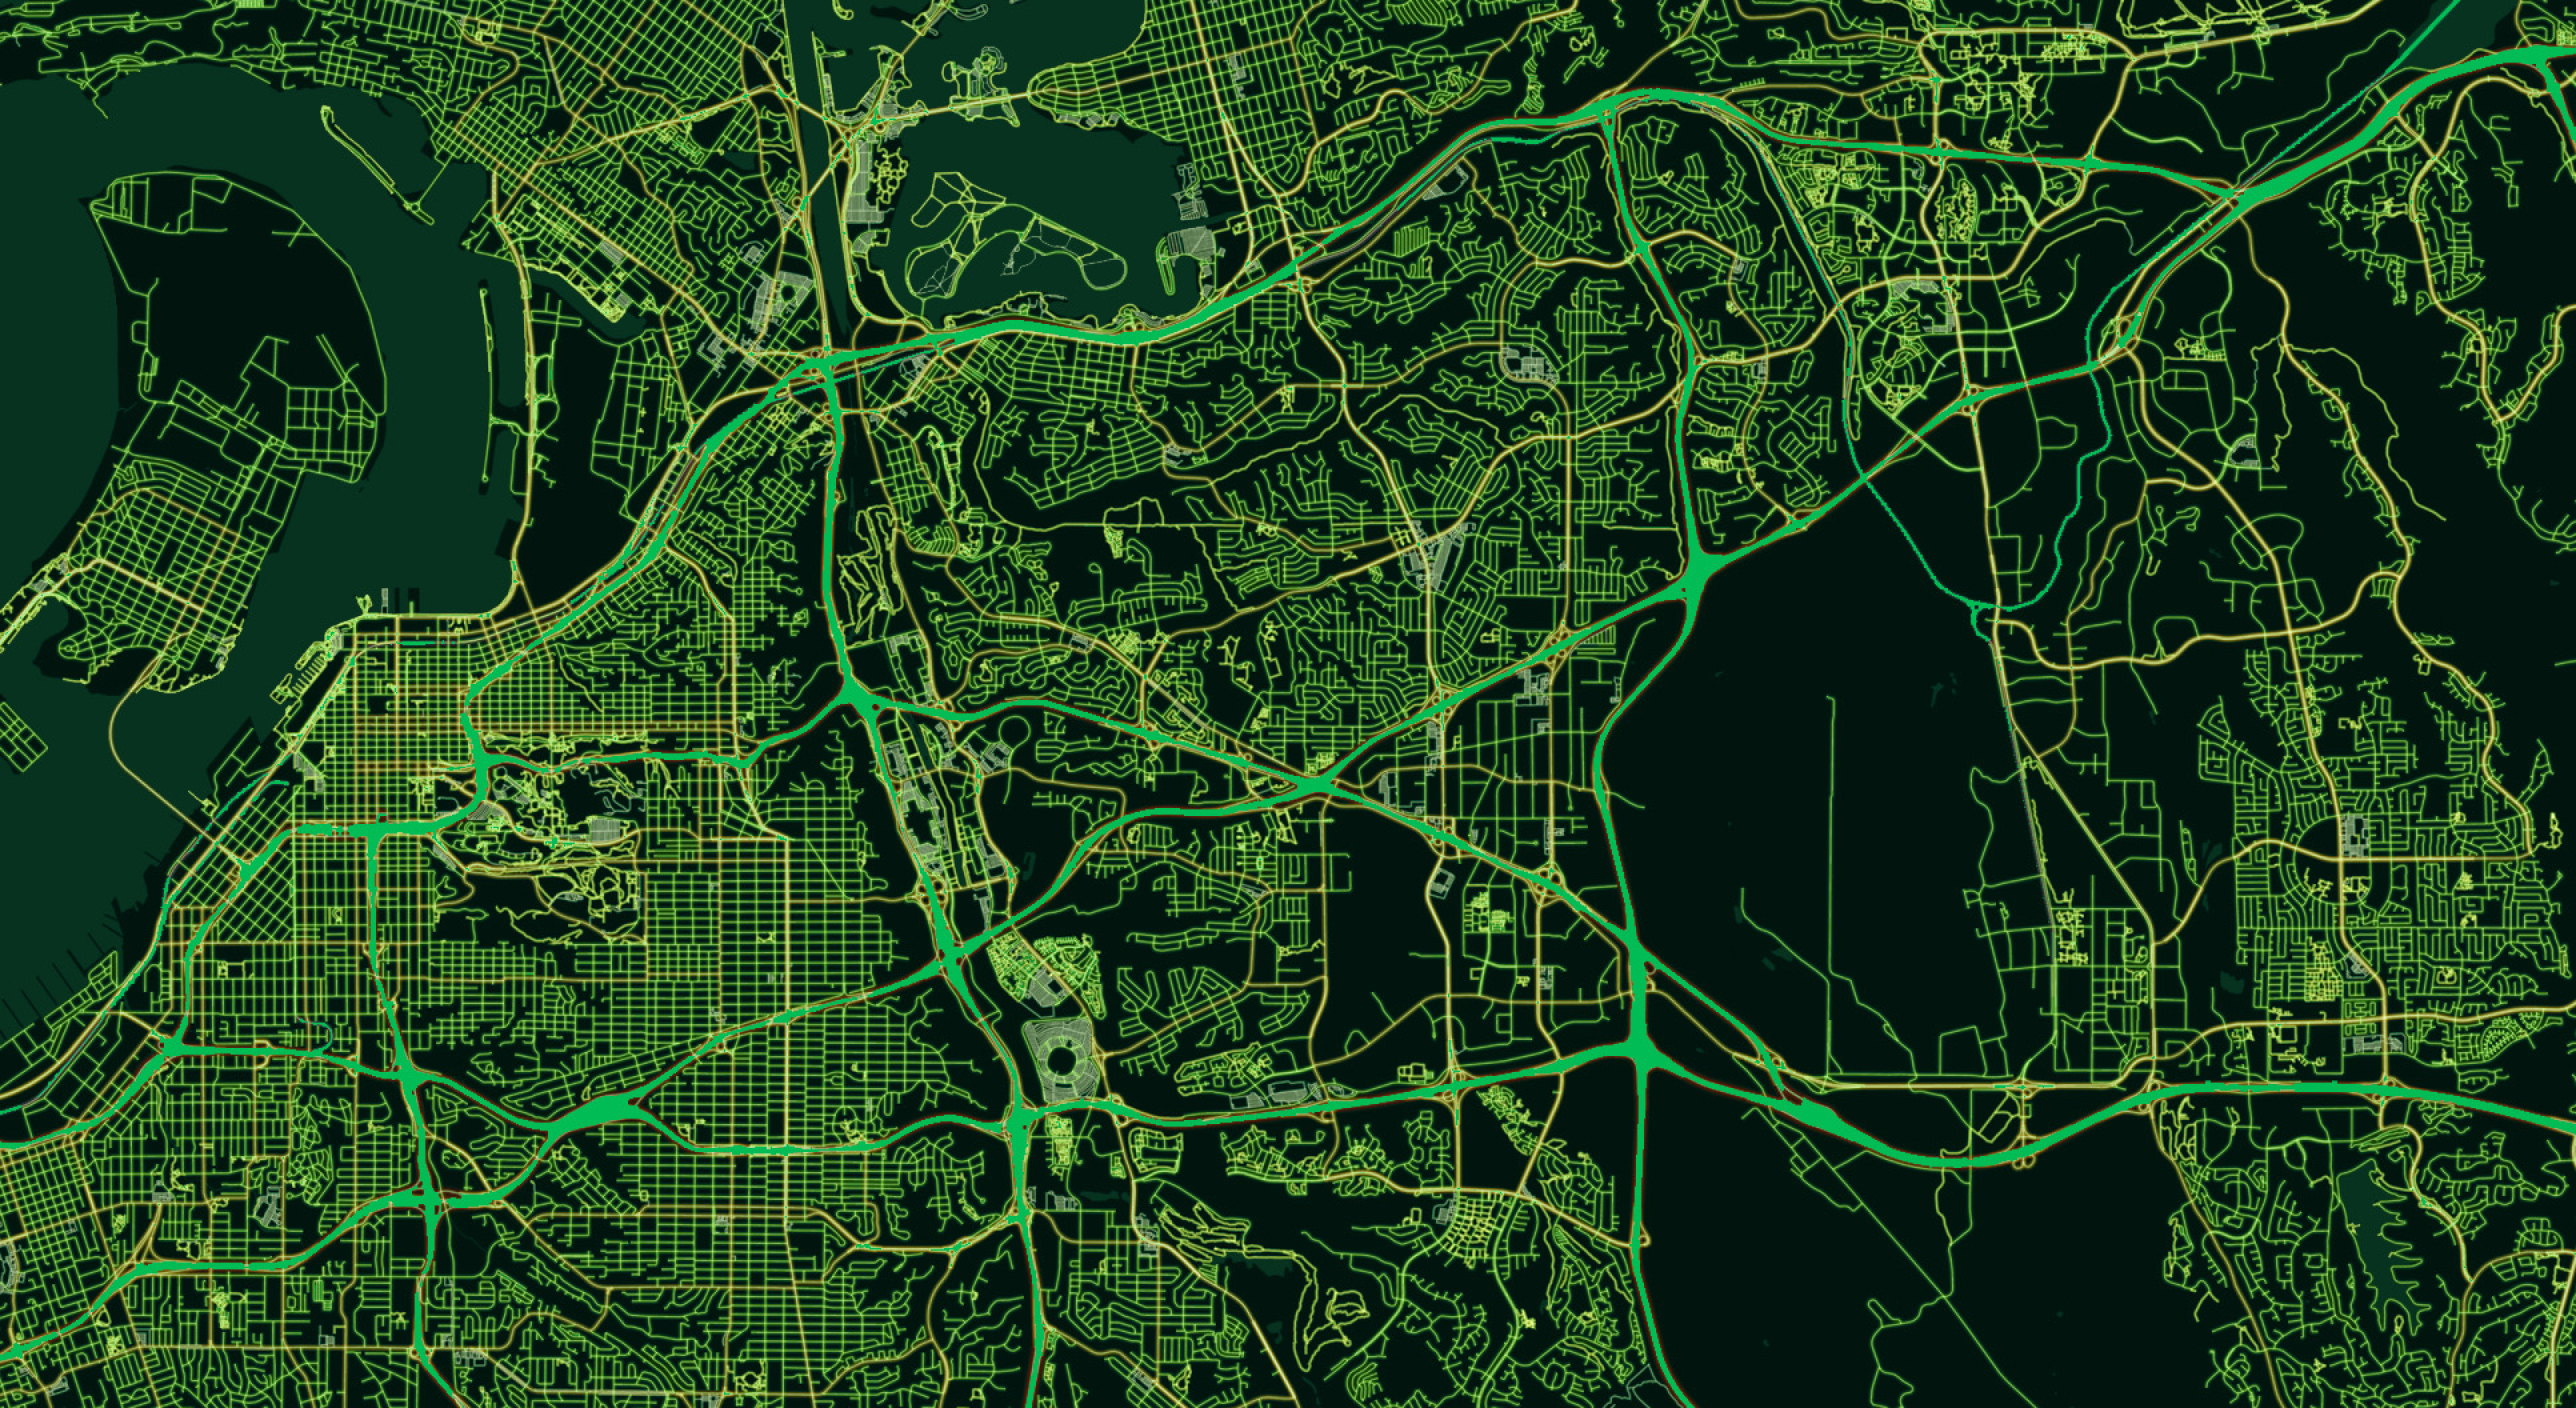 A map highlighting streets and highways in different shades of green